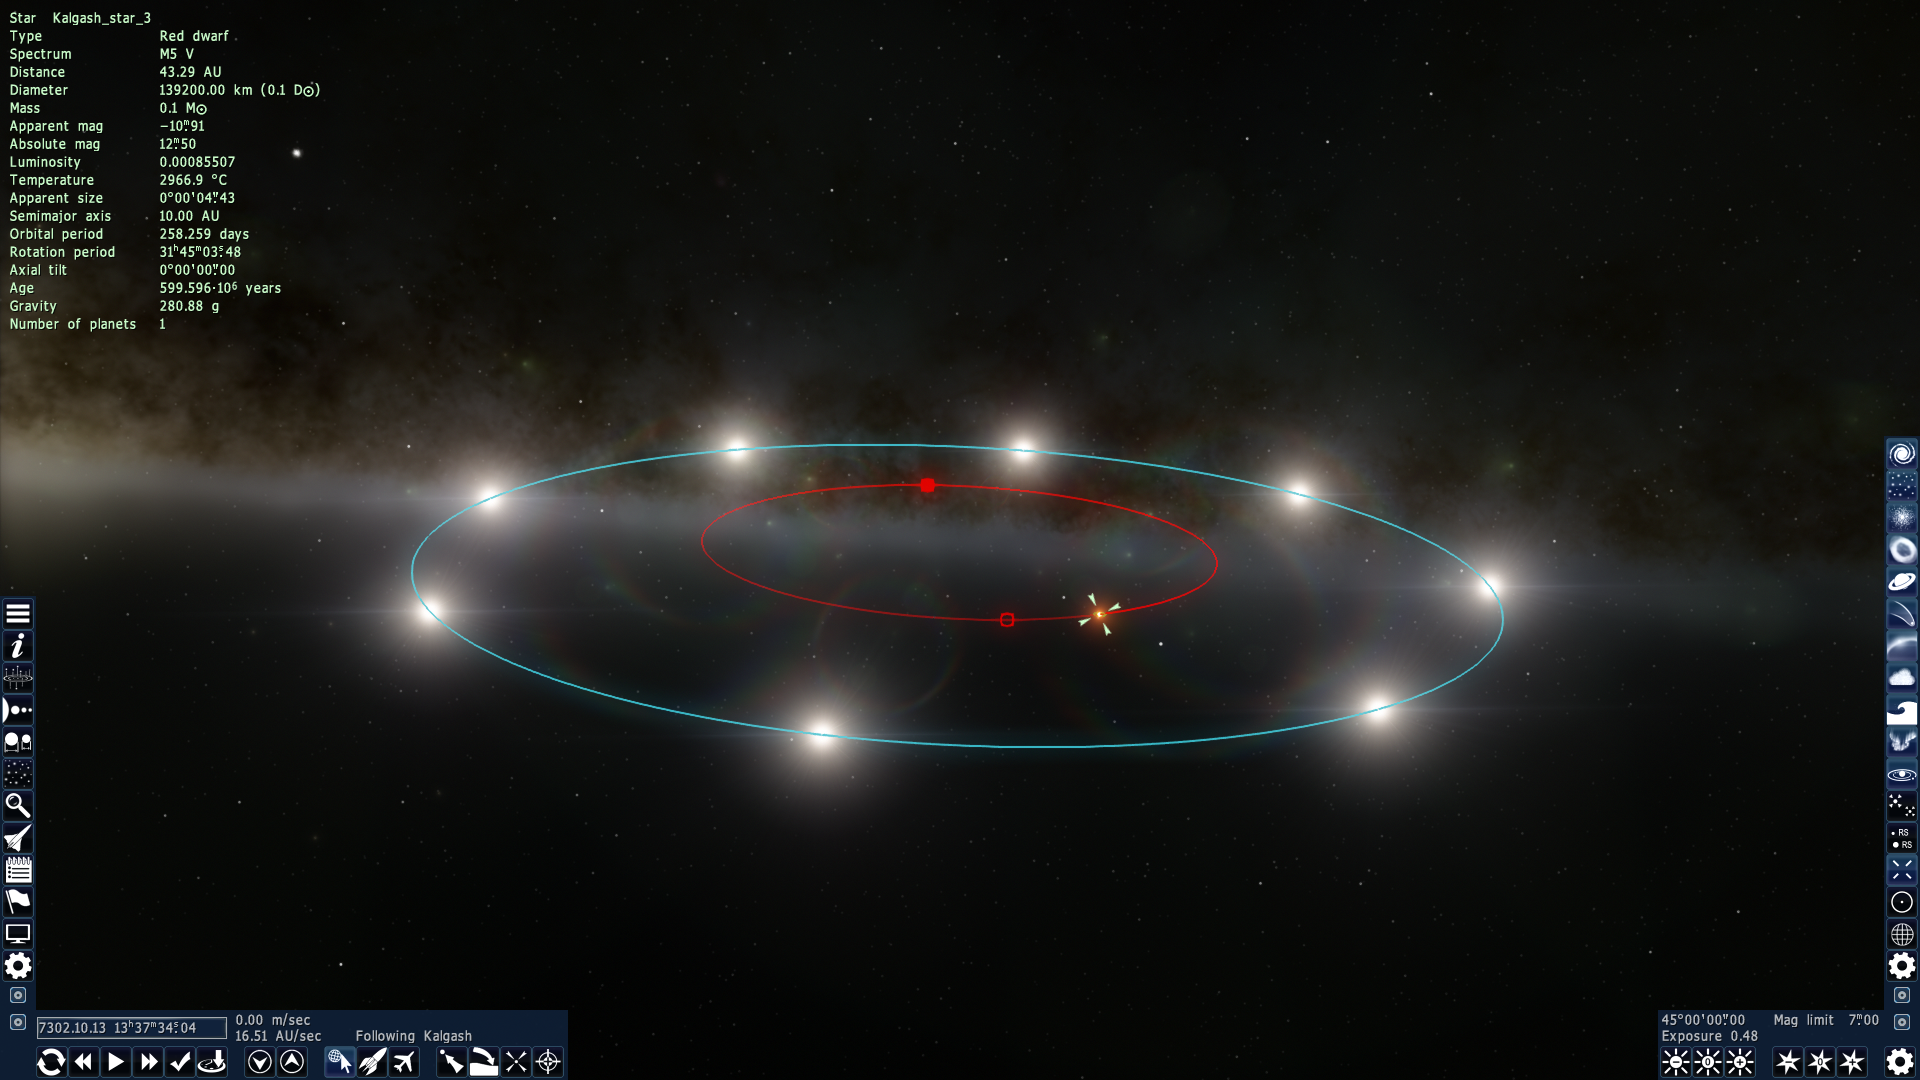 The Kalgash 2 system, with a ring of suns orbiting a black hole, and a red dwarf between them. The Kalgash planet is orbiting the red dwarf